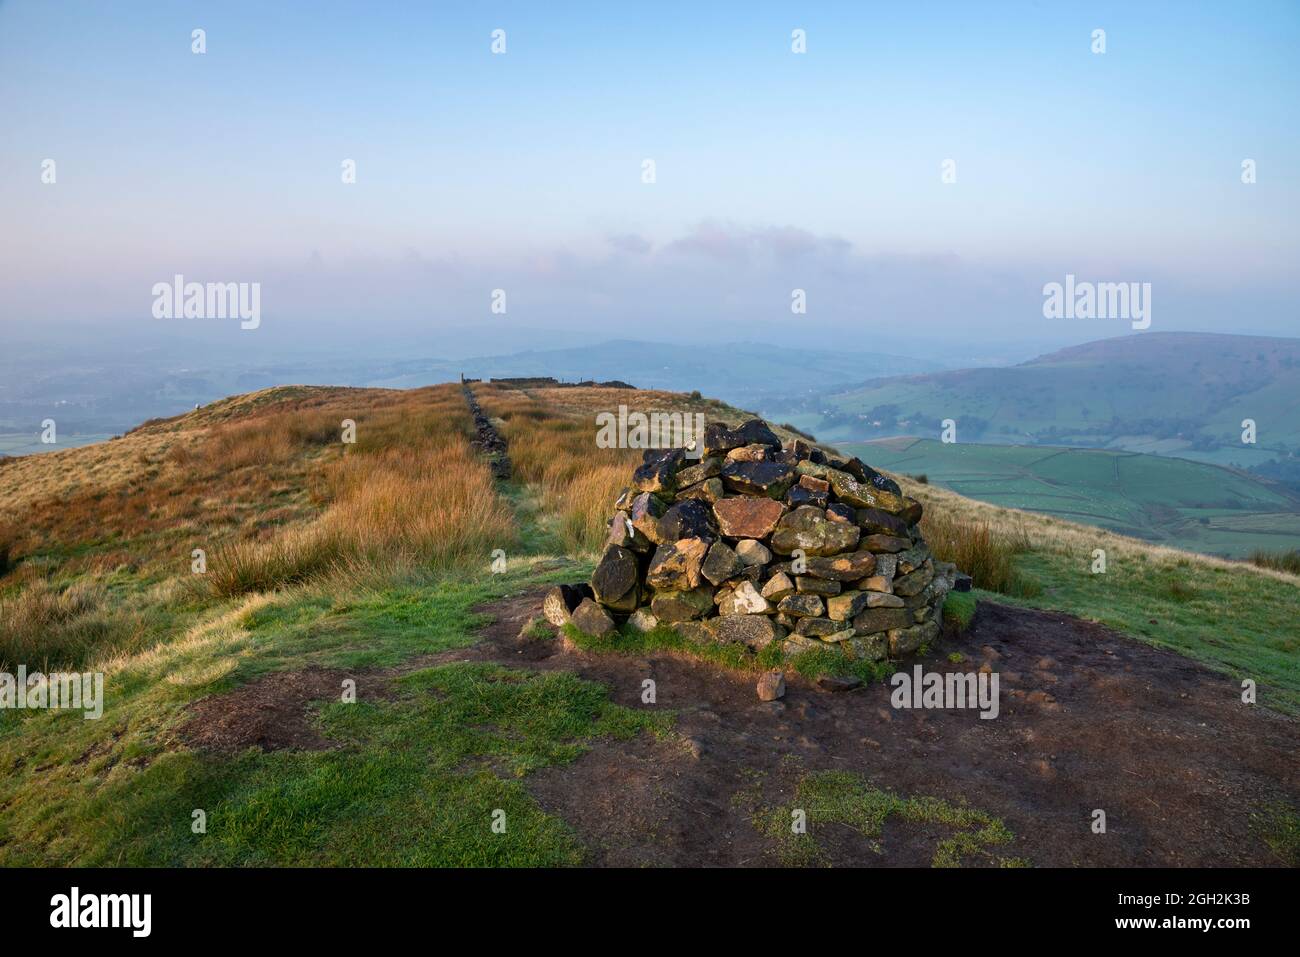 Cairn on the summit of South Head near Hayfield in the High Peak, Derbyshire, England. A view from this hilltop on a beautiful autumn morning. Stock Photo